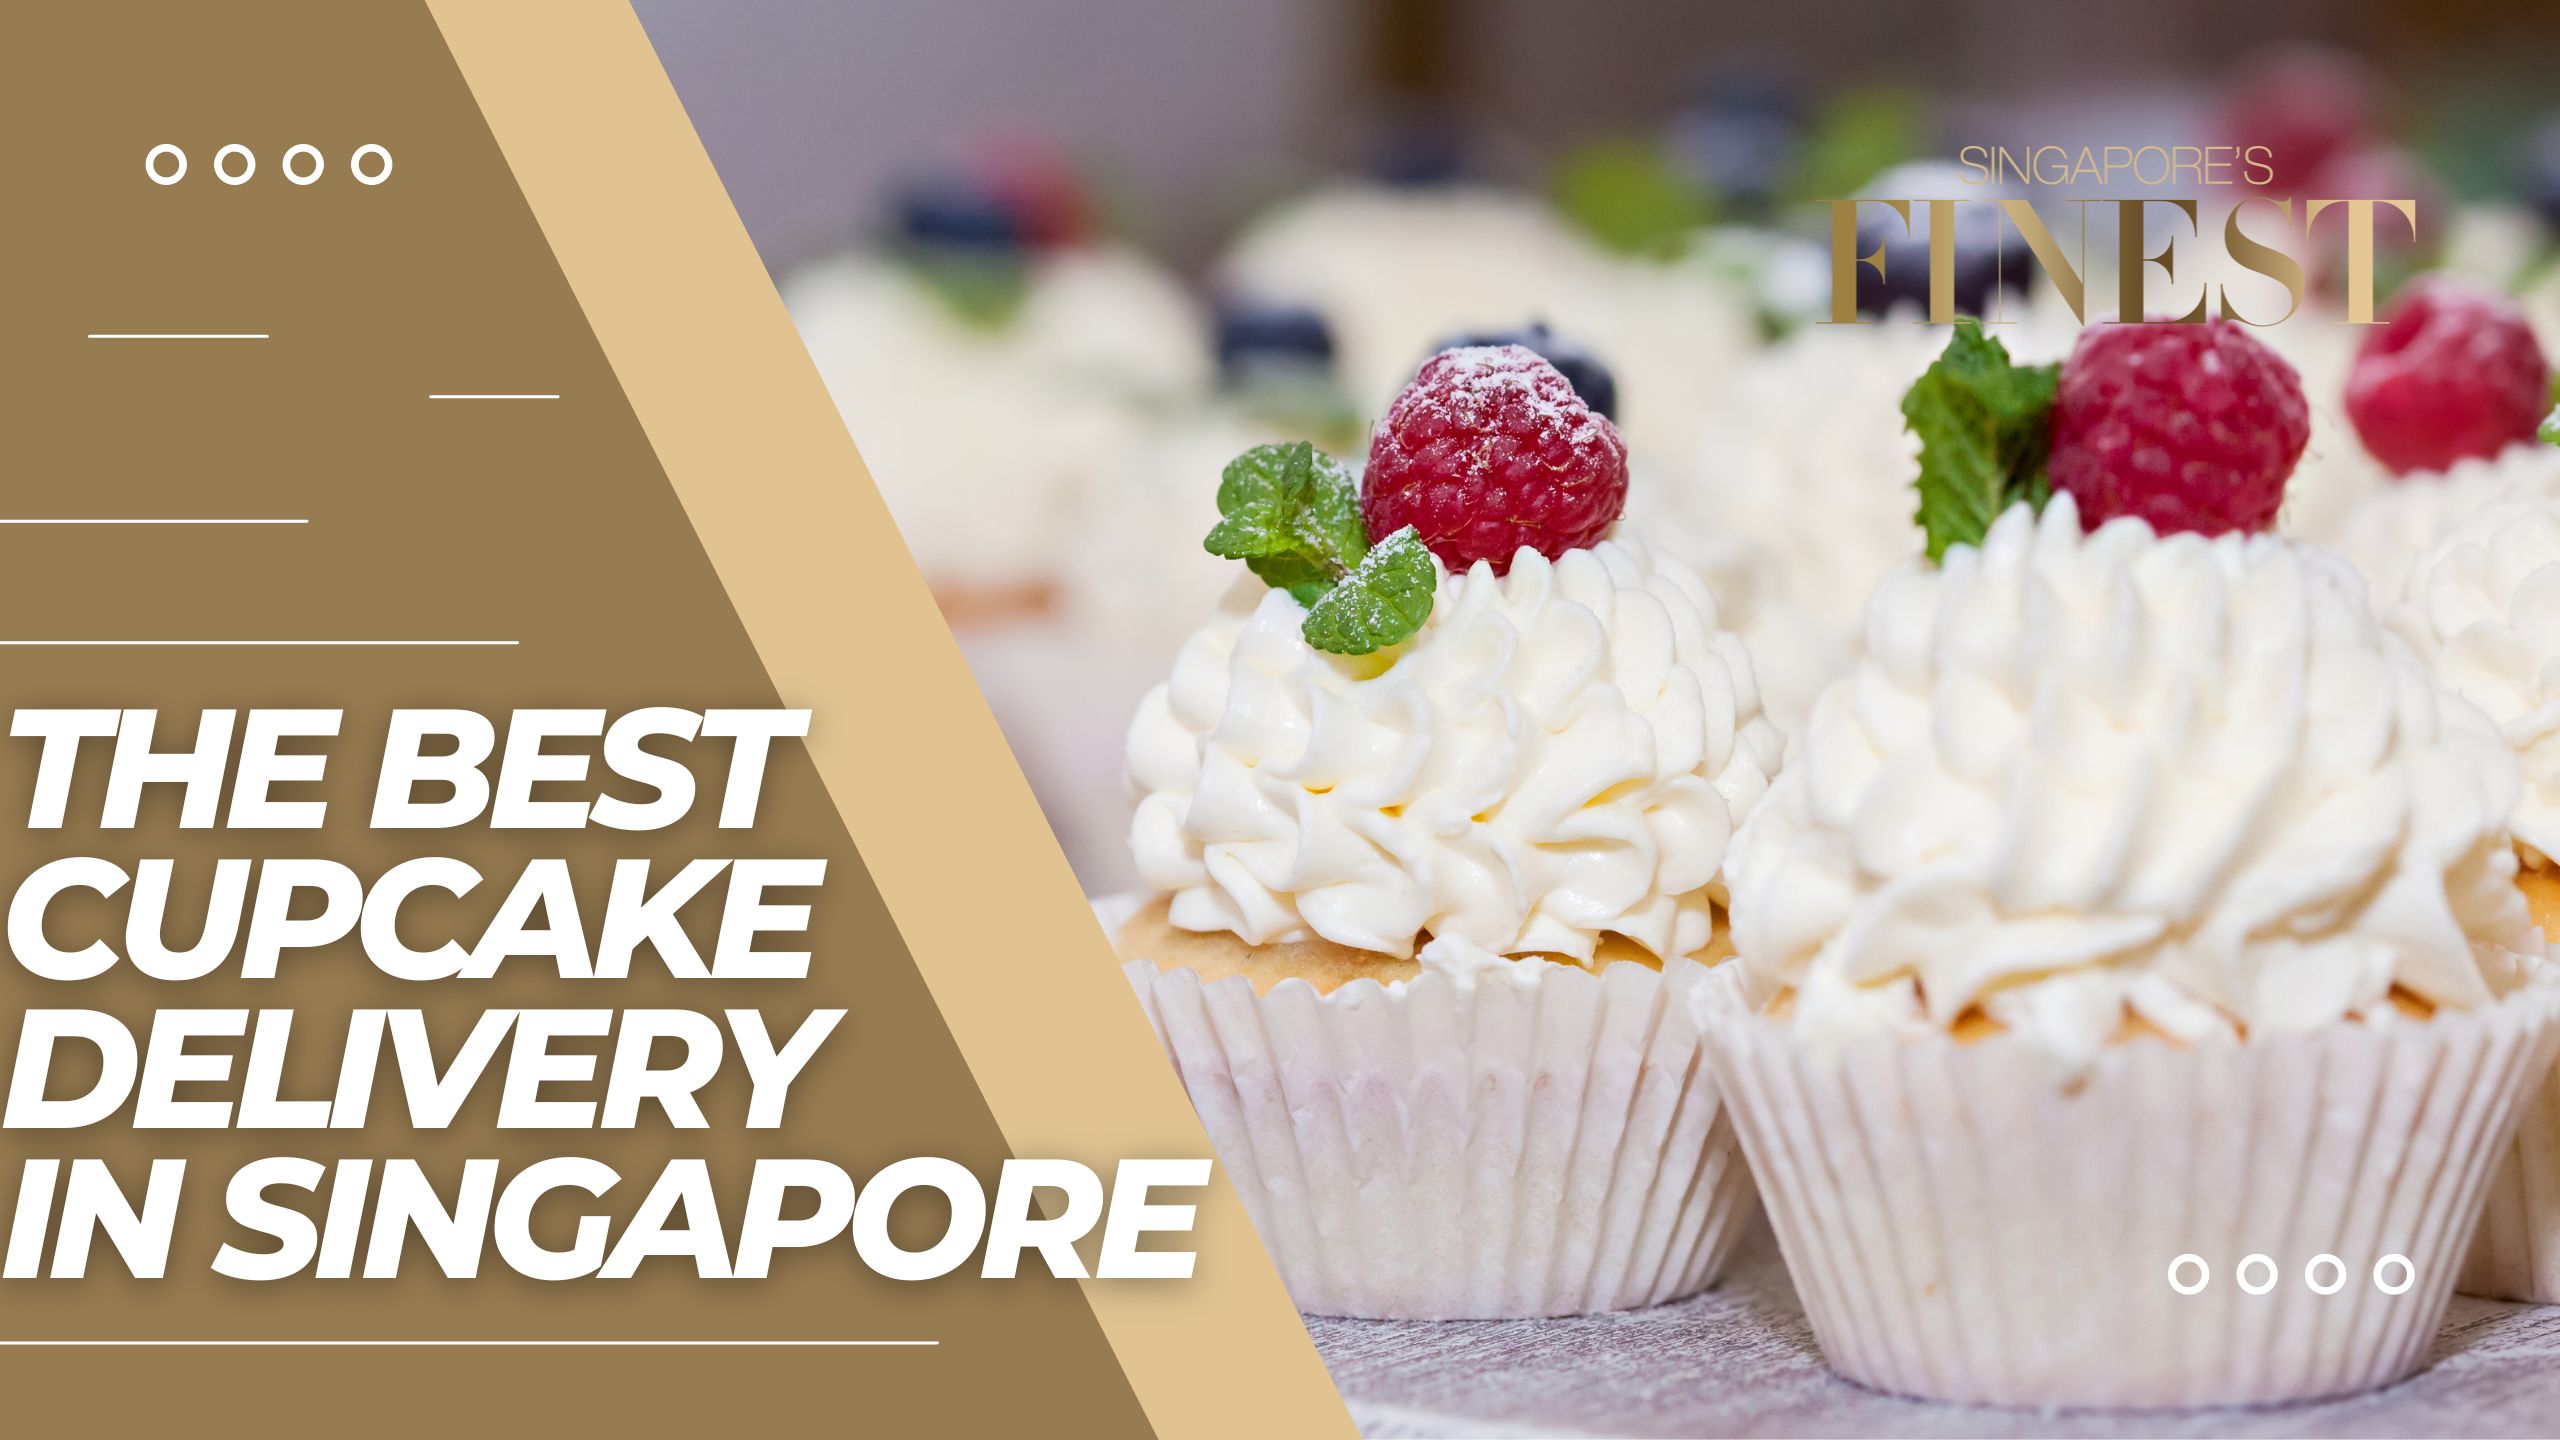 The Finest Cupcake Delivery in Singapore